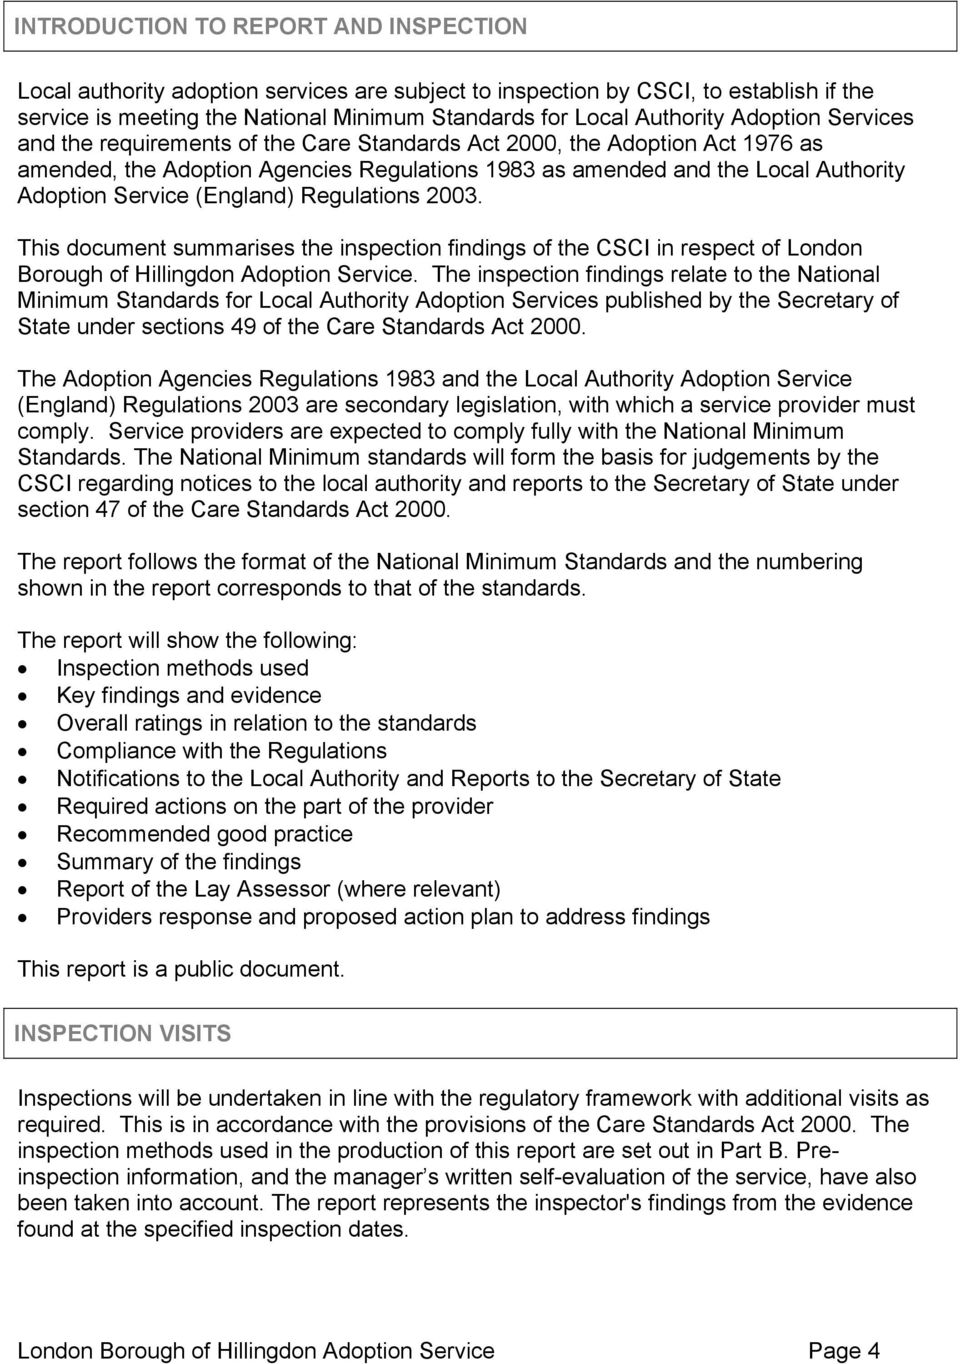 (England) Regulations 2003. This document summarises the inspection findings of the CSCI in respect of London Borough of Hillingdon Adoption Service.